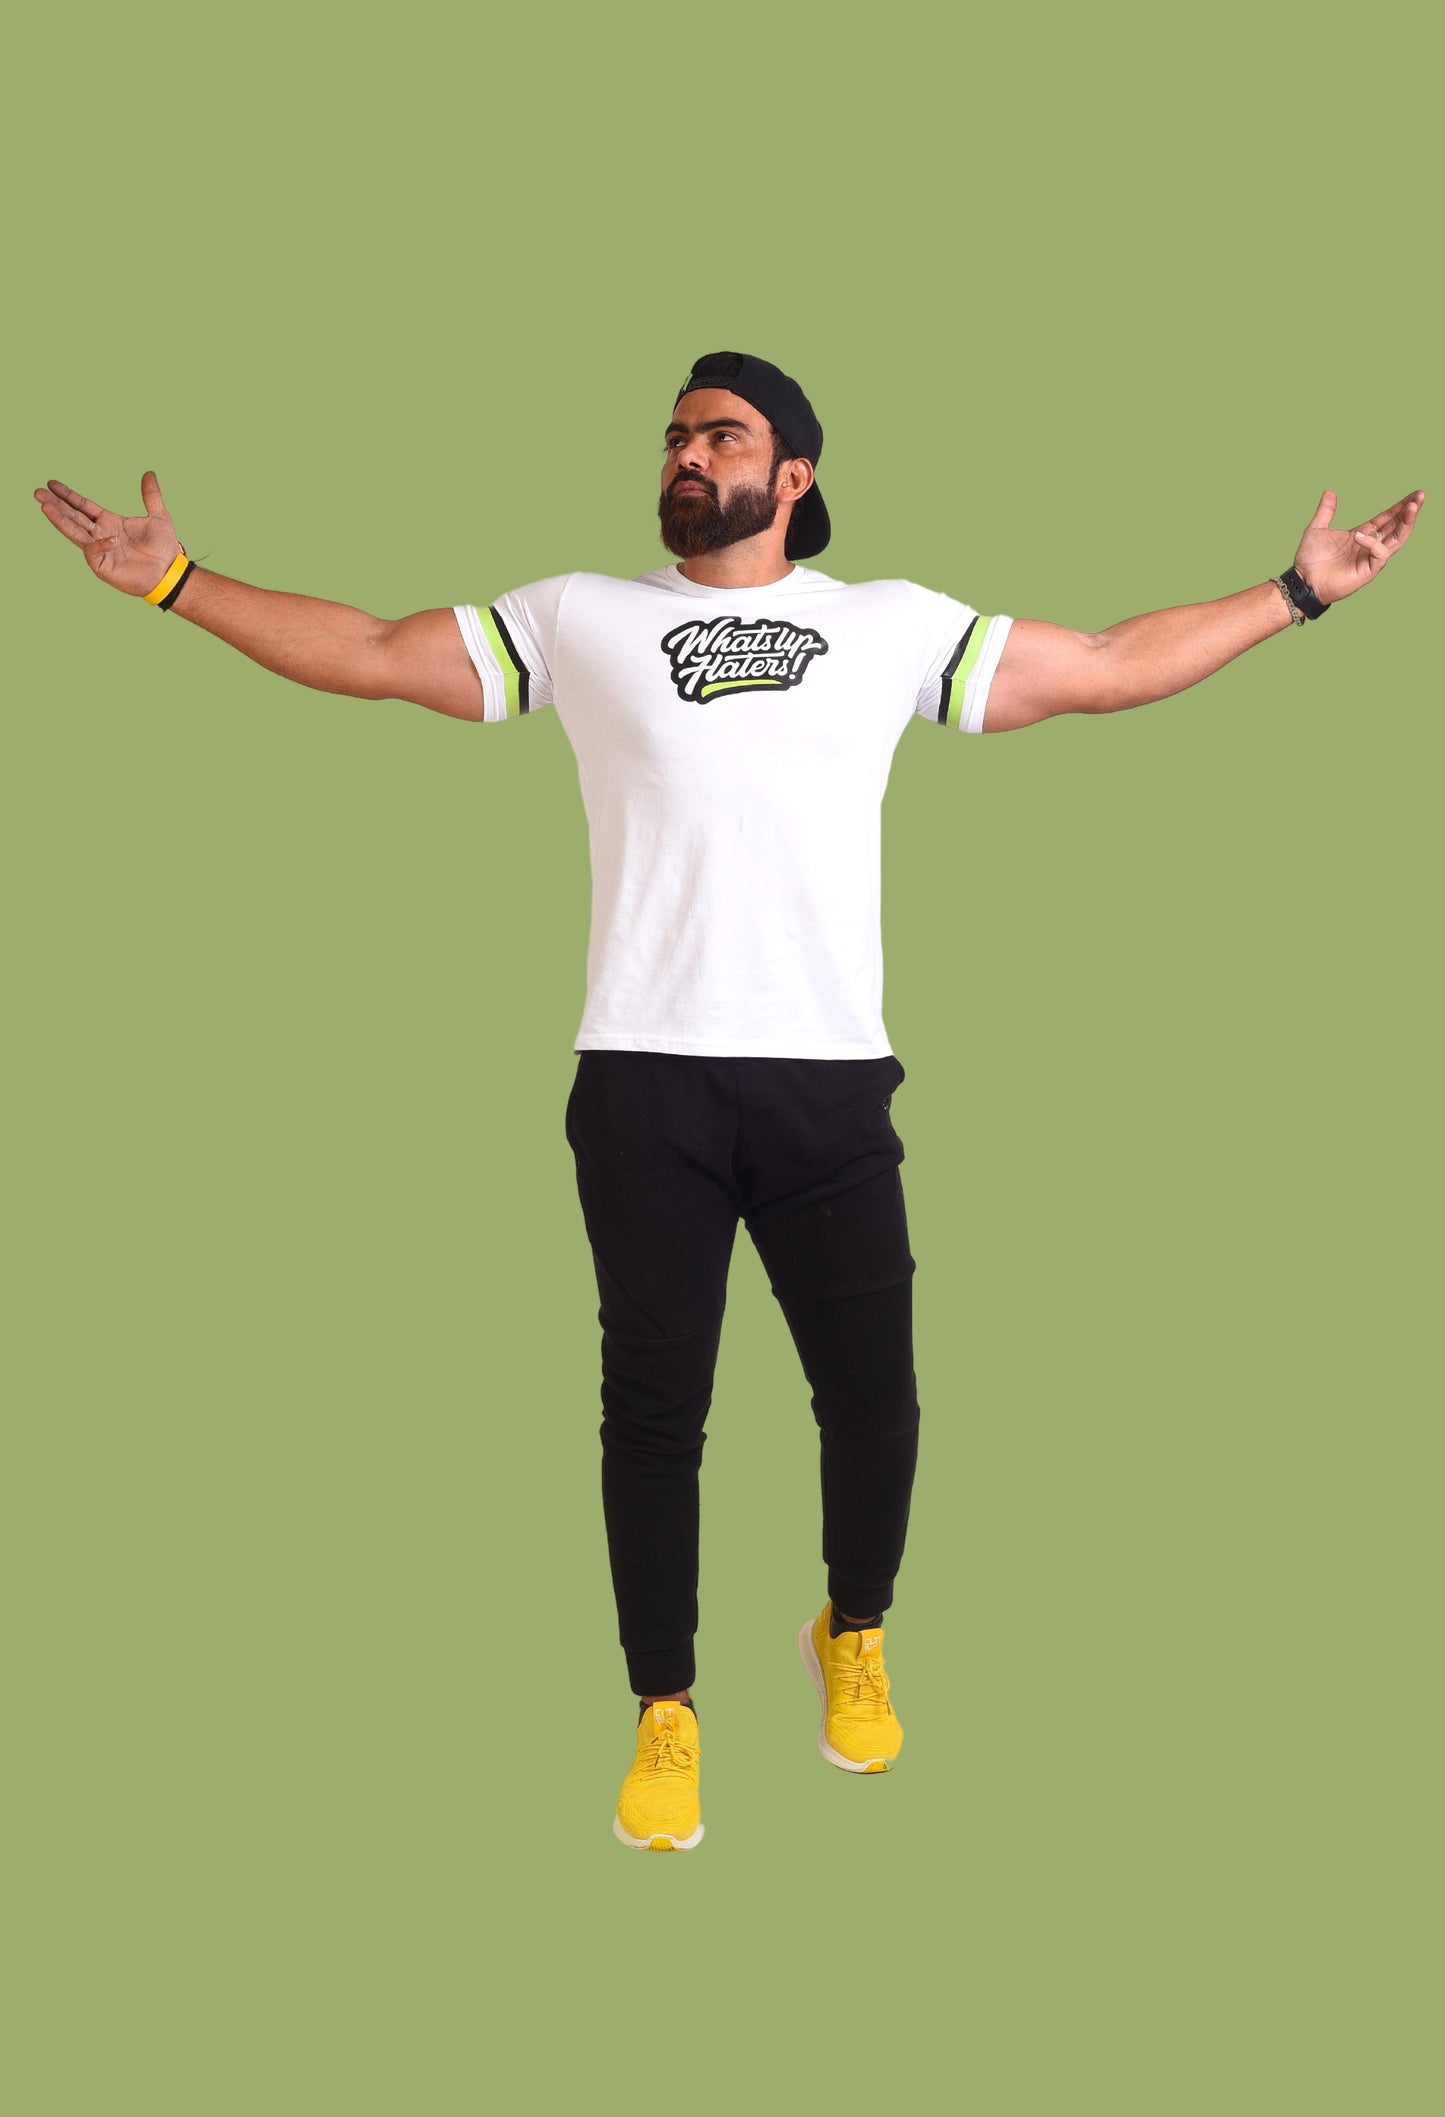 Gym T Shirt - What's Up Haters with premium cotton Lycra. The Sports T Shirt by Strong Soul